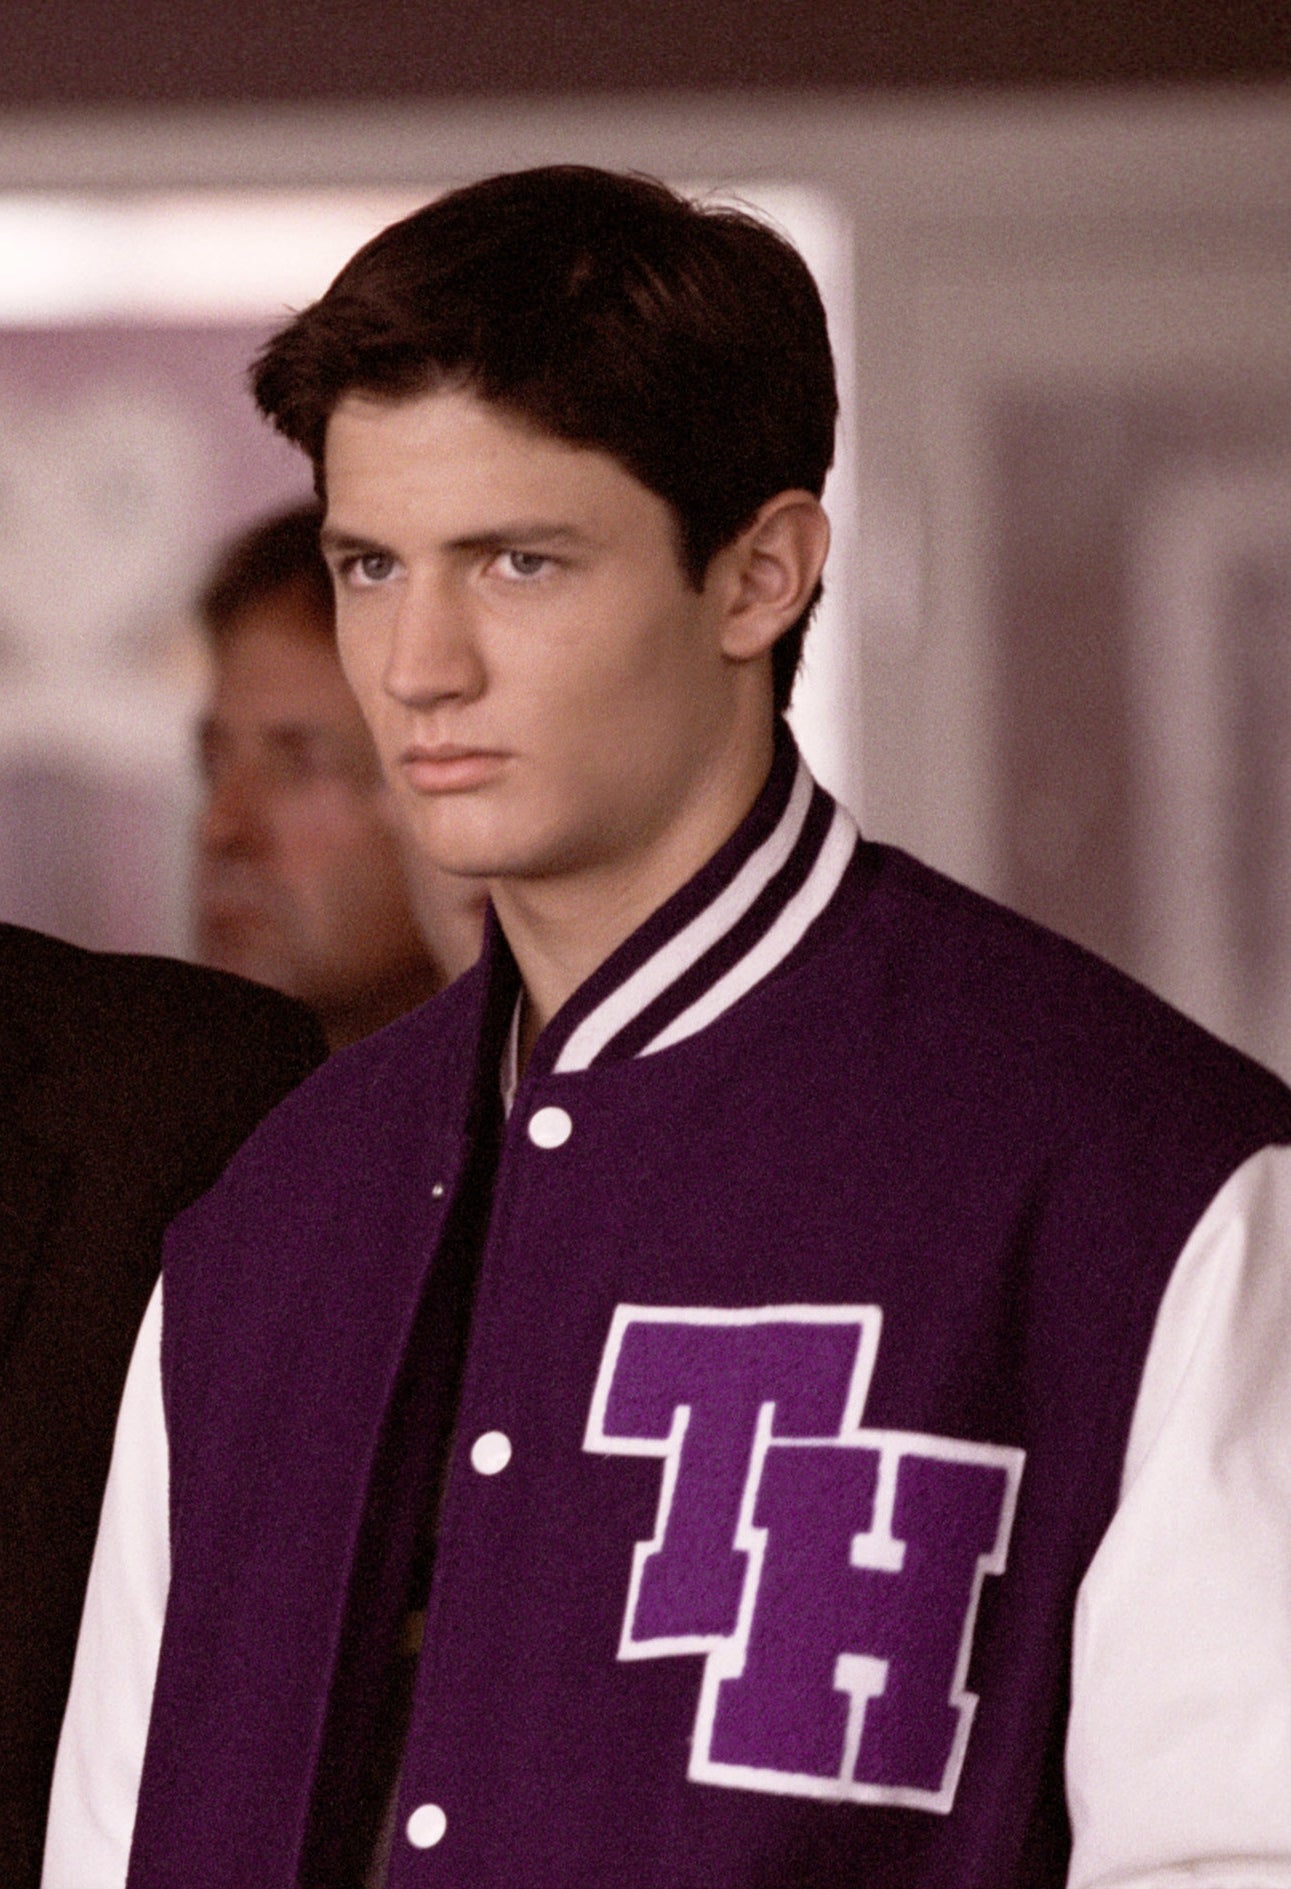 James as Nathan in a letter jacket